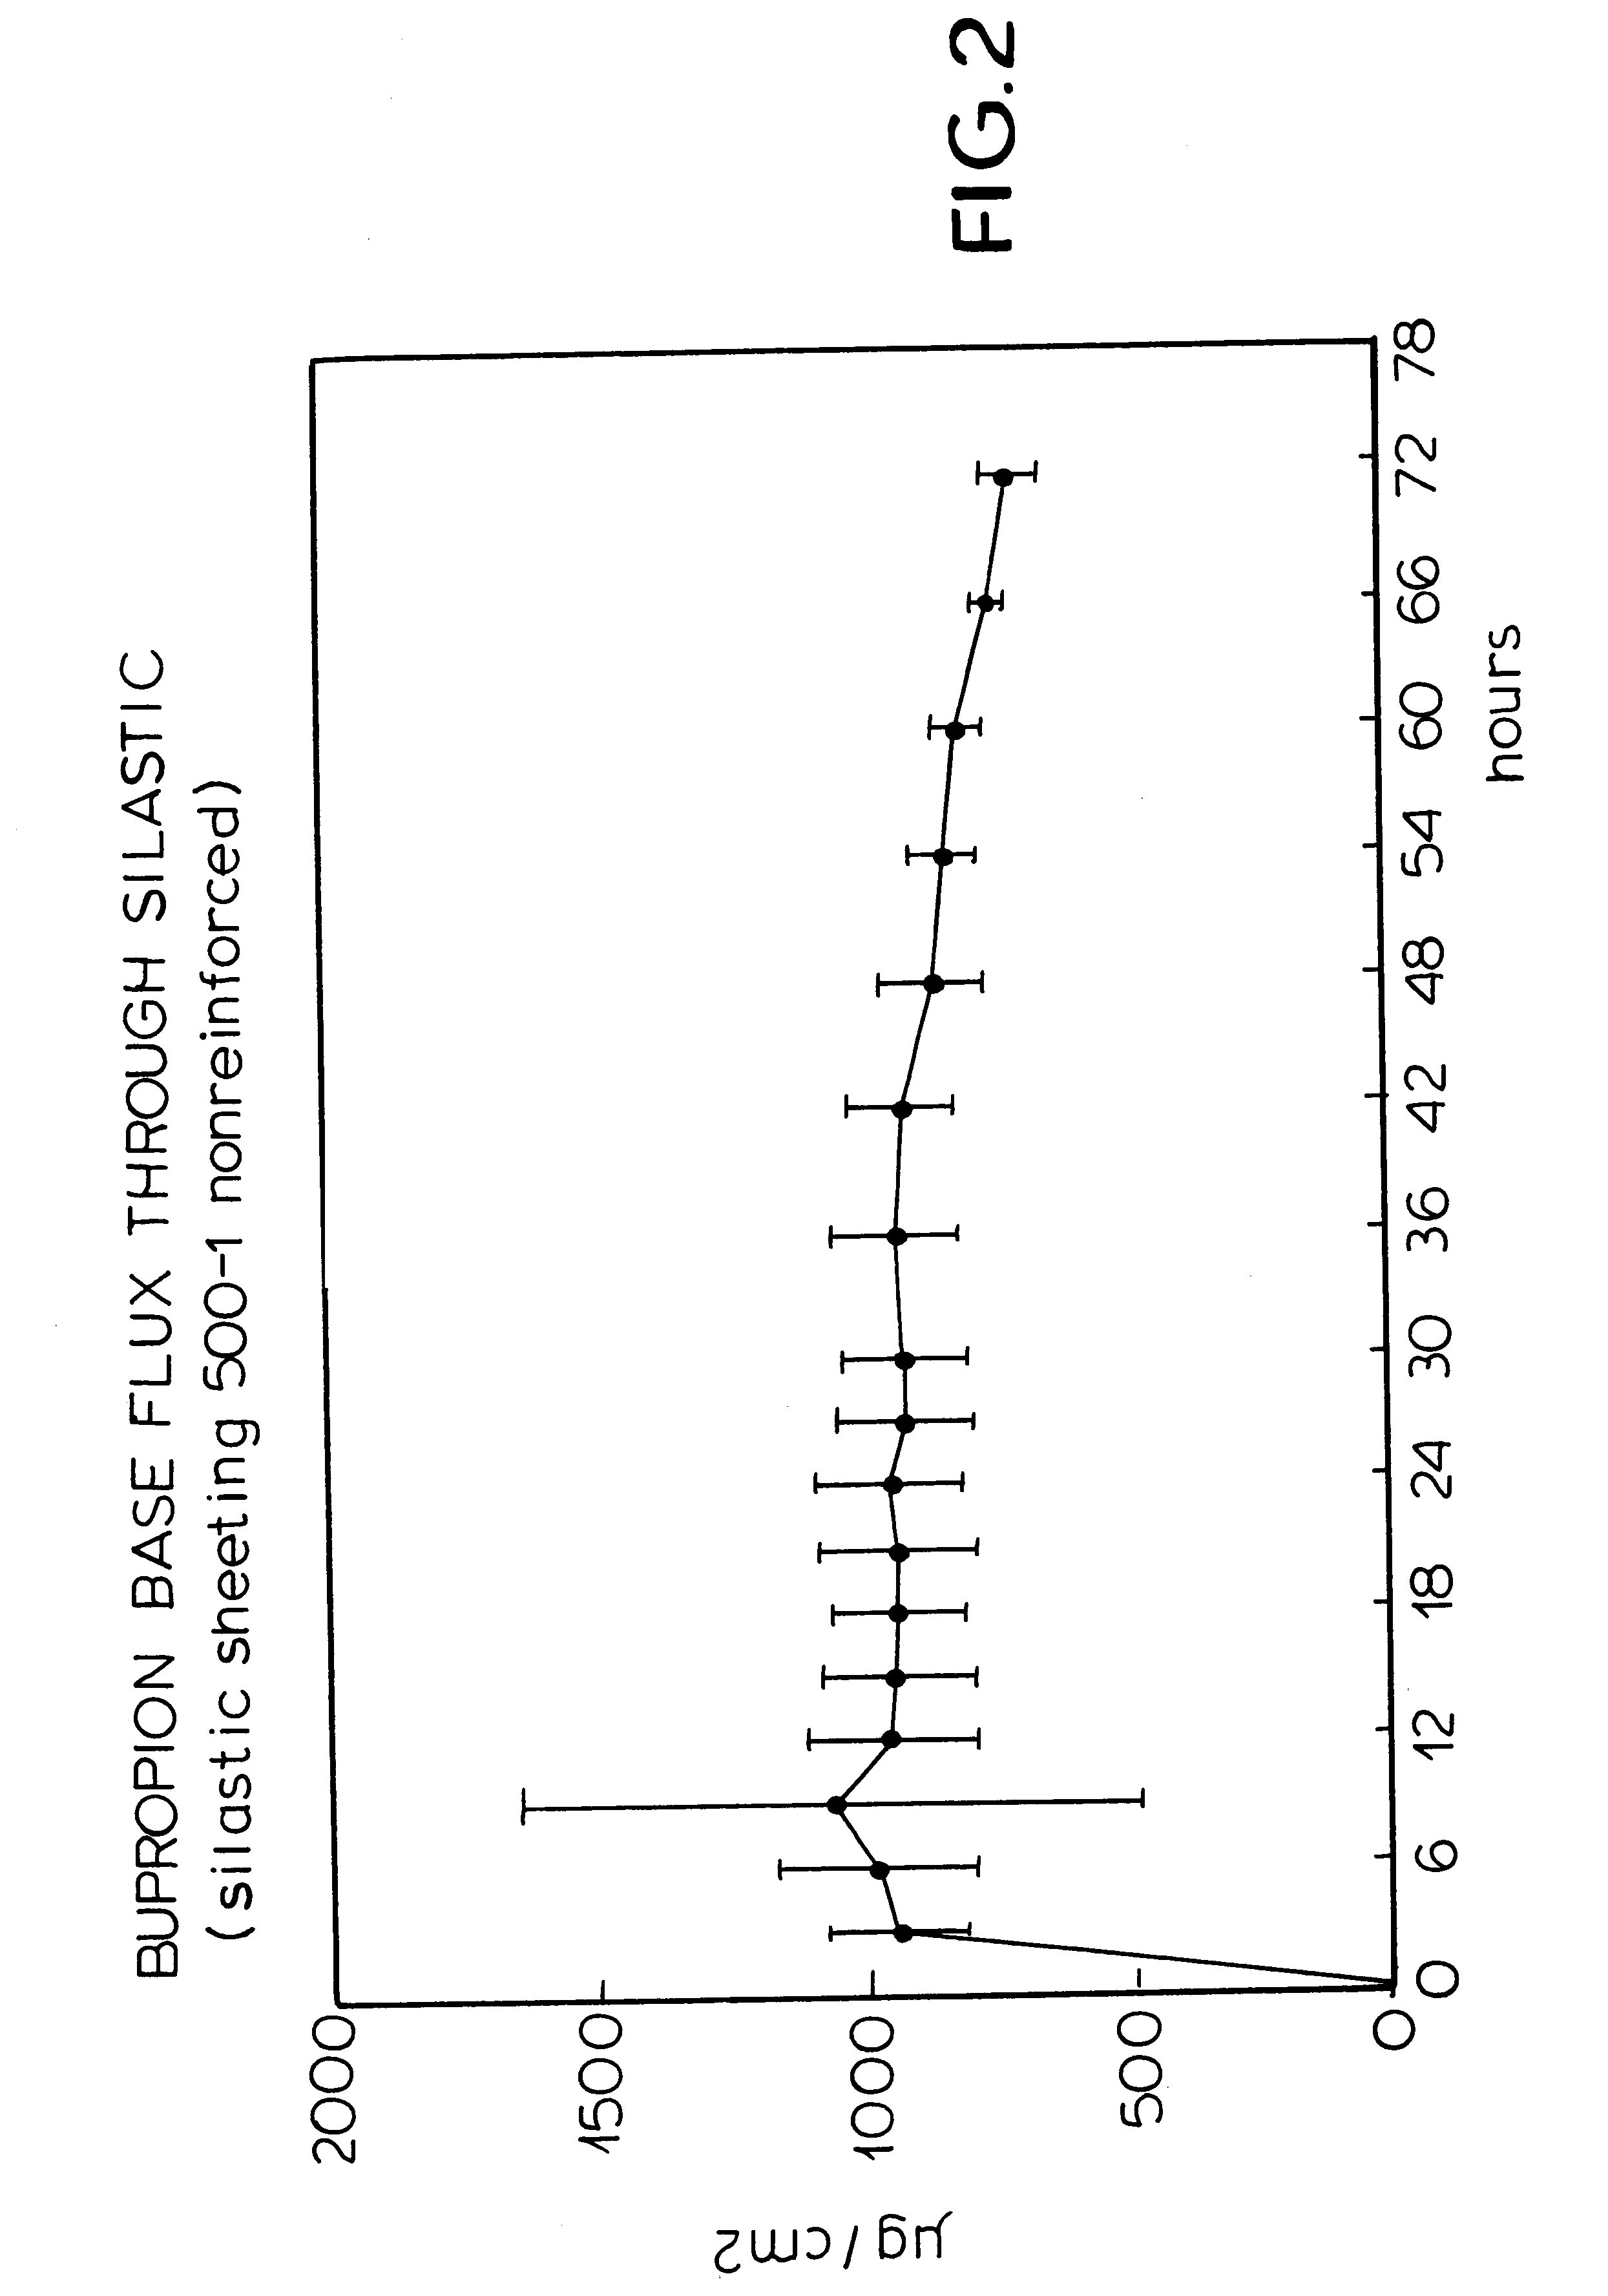 Patch and method for transdermal delivery of bupropion base